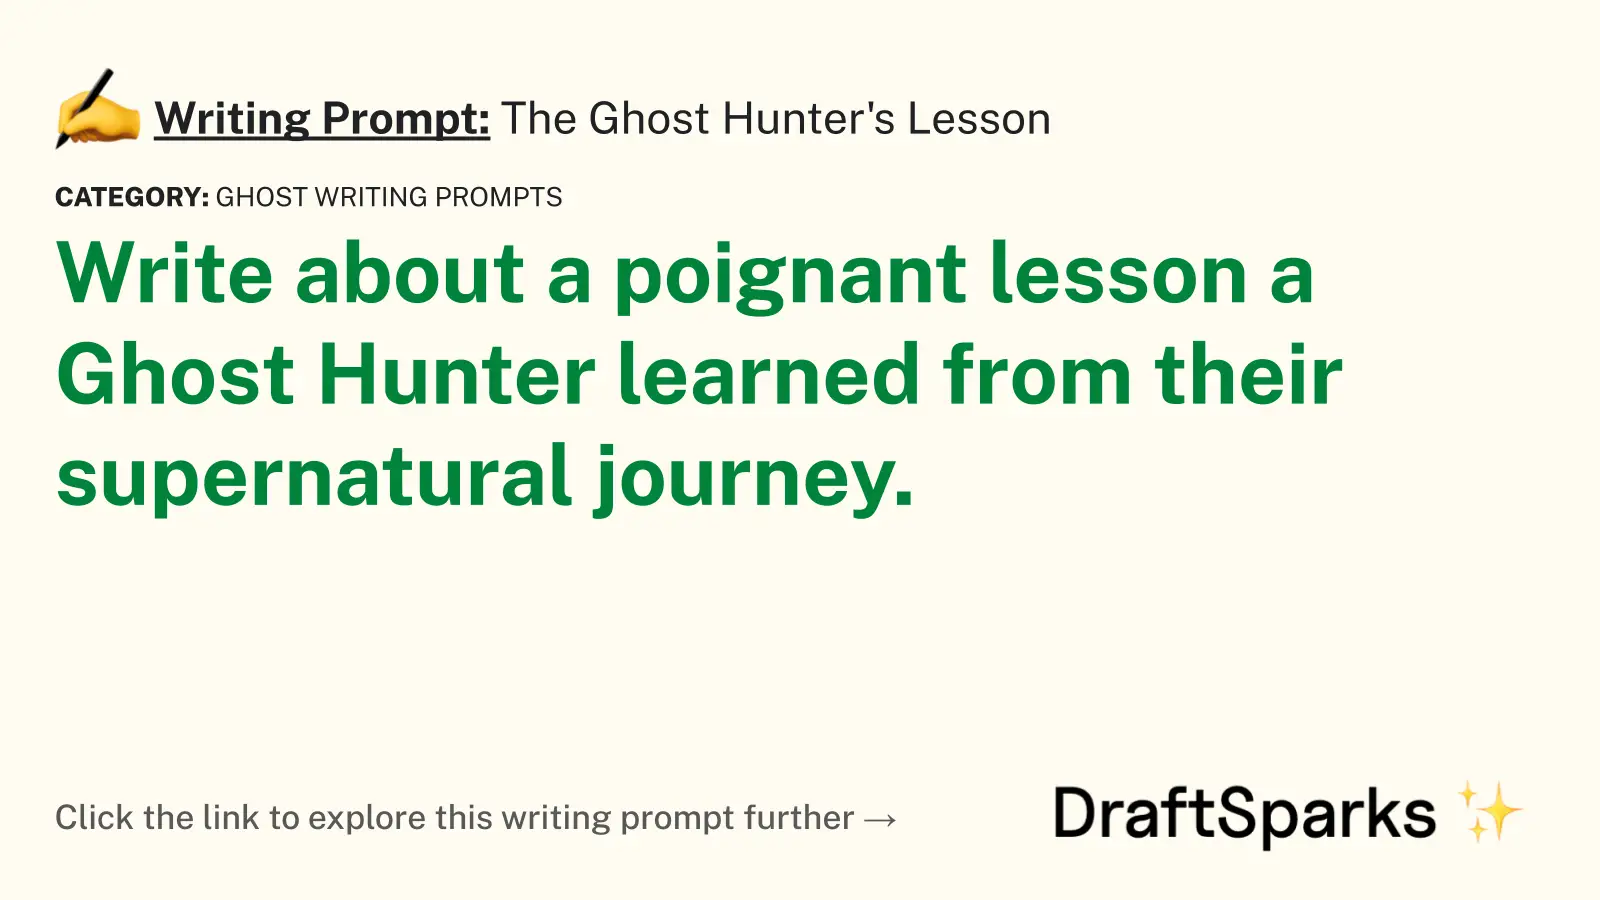 The Ghost Hunter’s Lesson